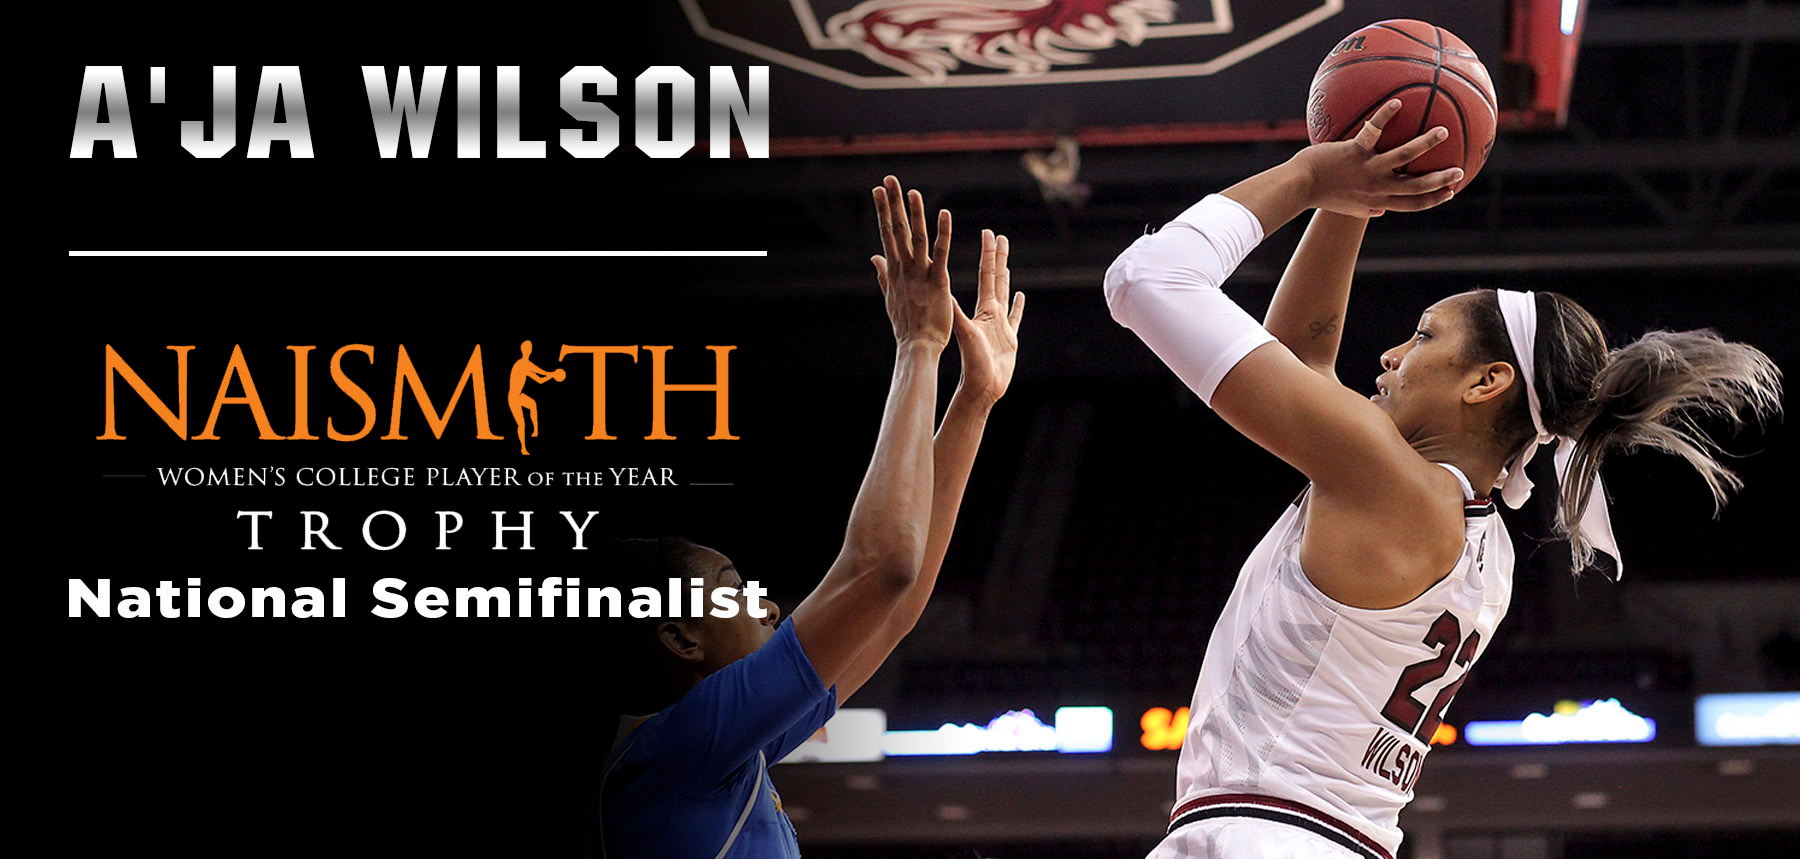 Wilson Named Semifinalist for Naismith Trophy